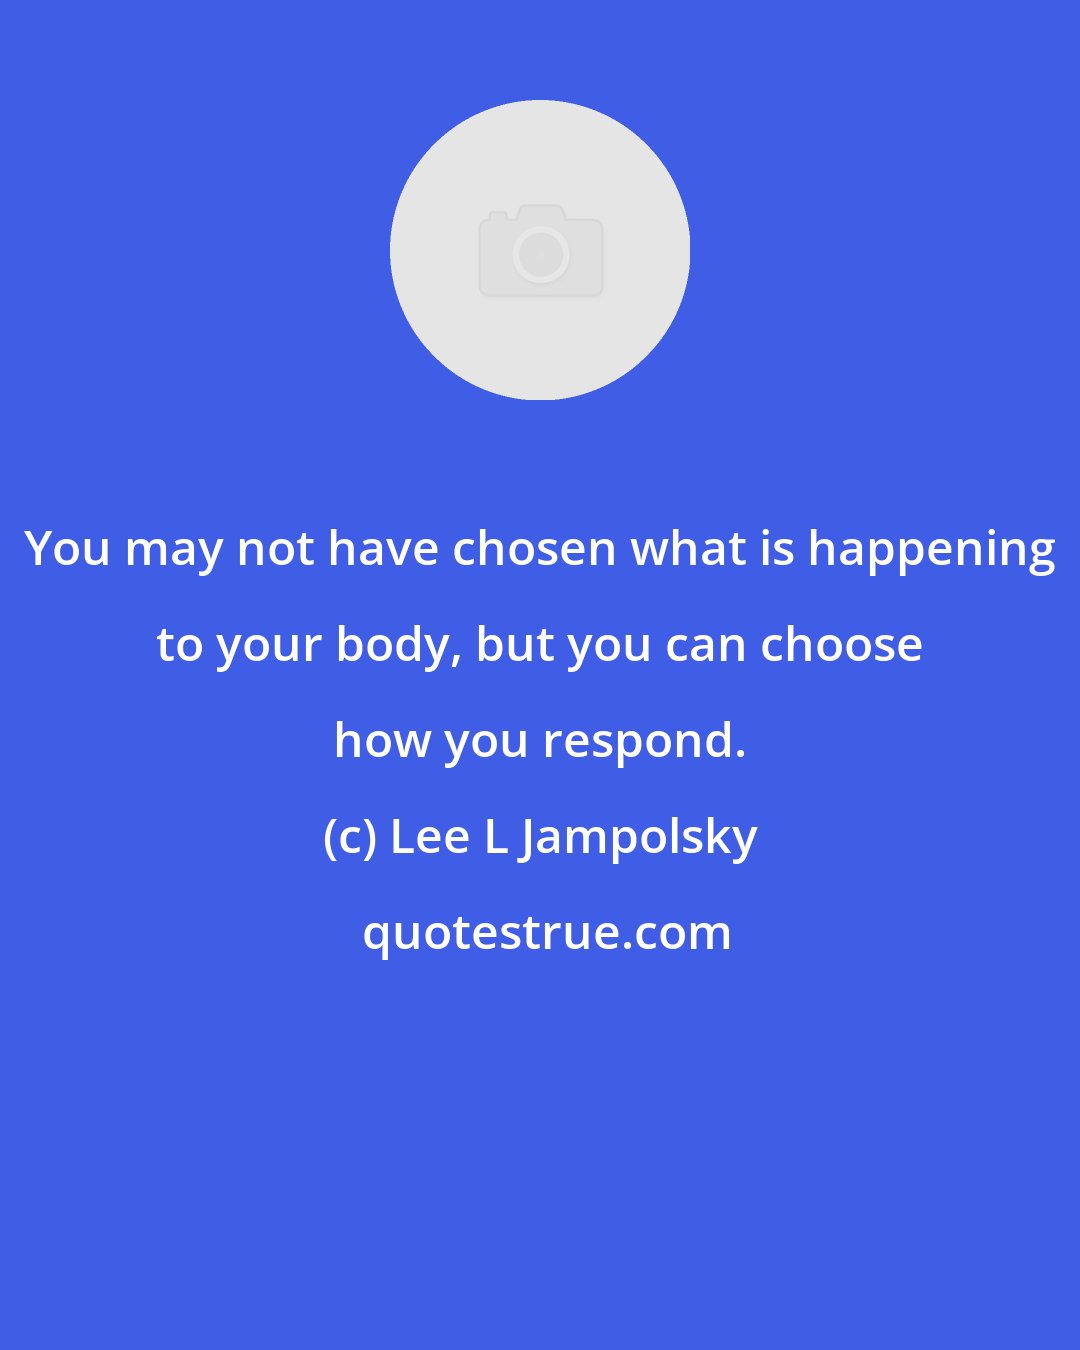 Lee L Jampolsky: You may not have chosen what is happening to your body, but you can choose how you respond.